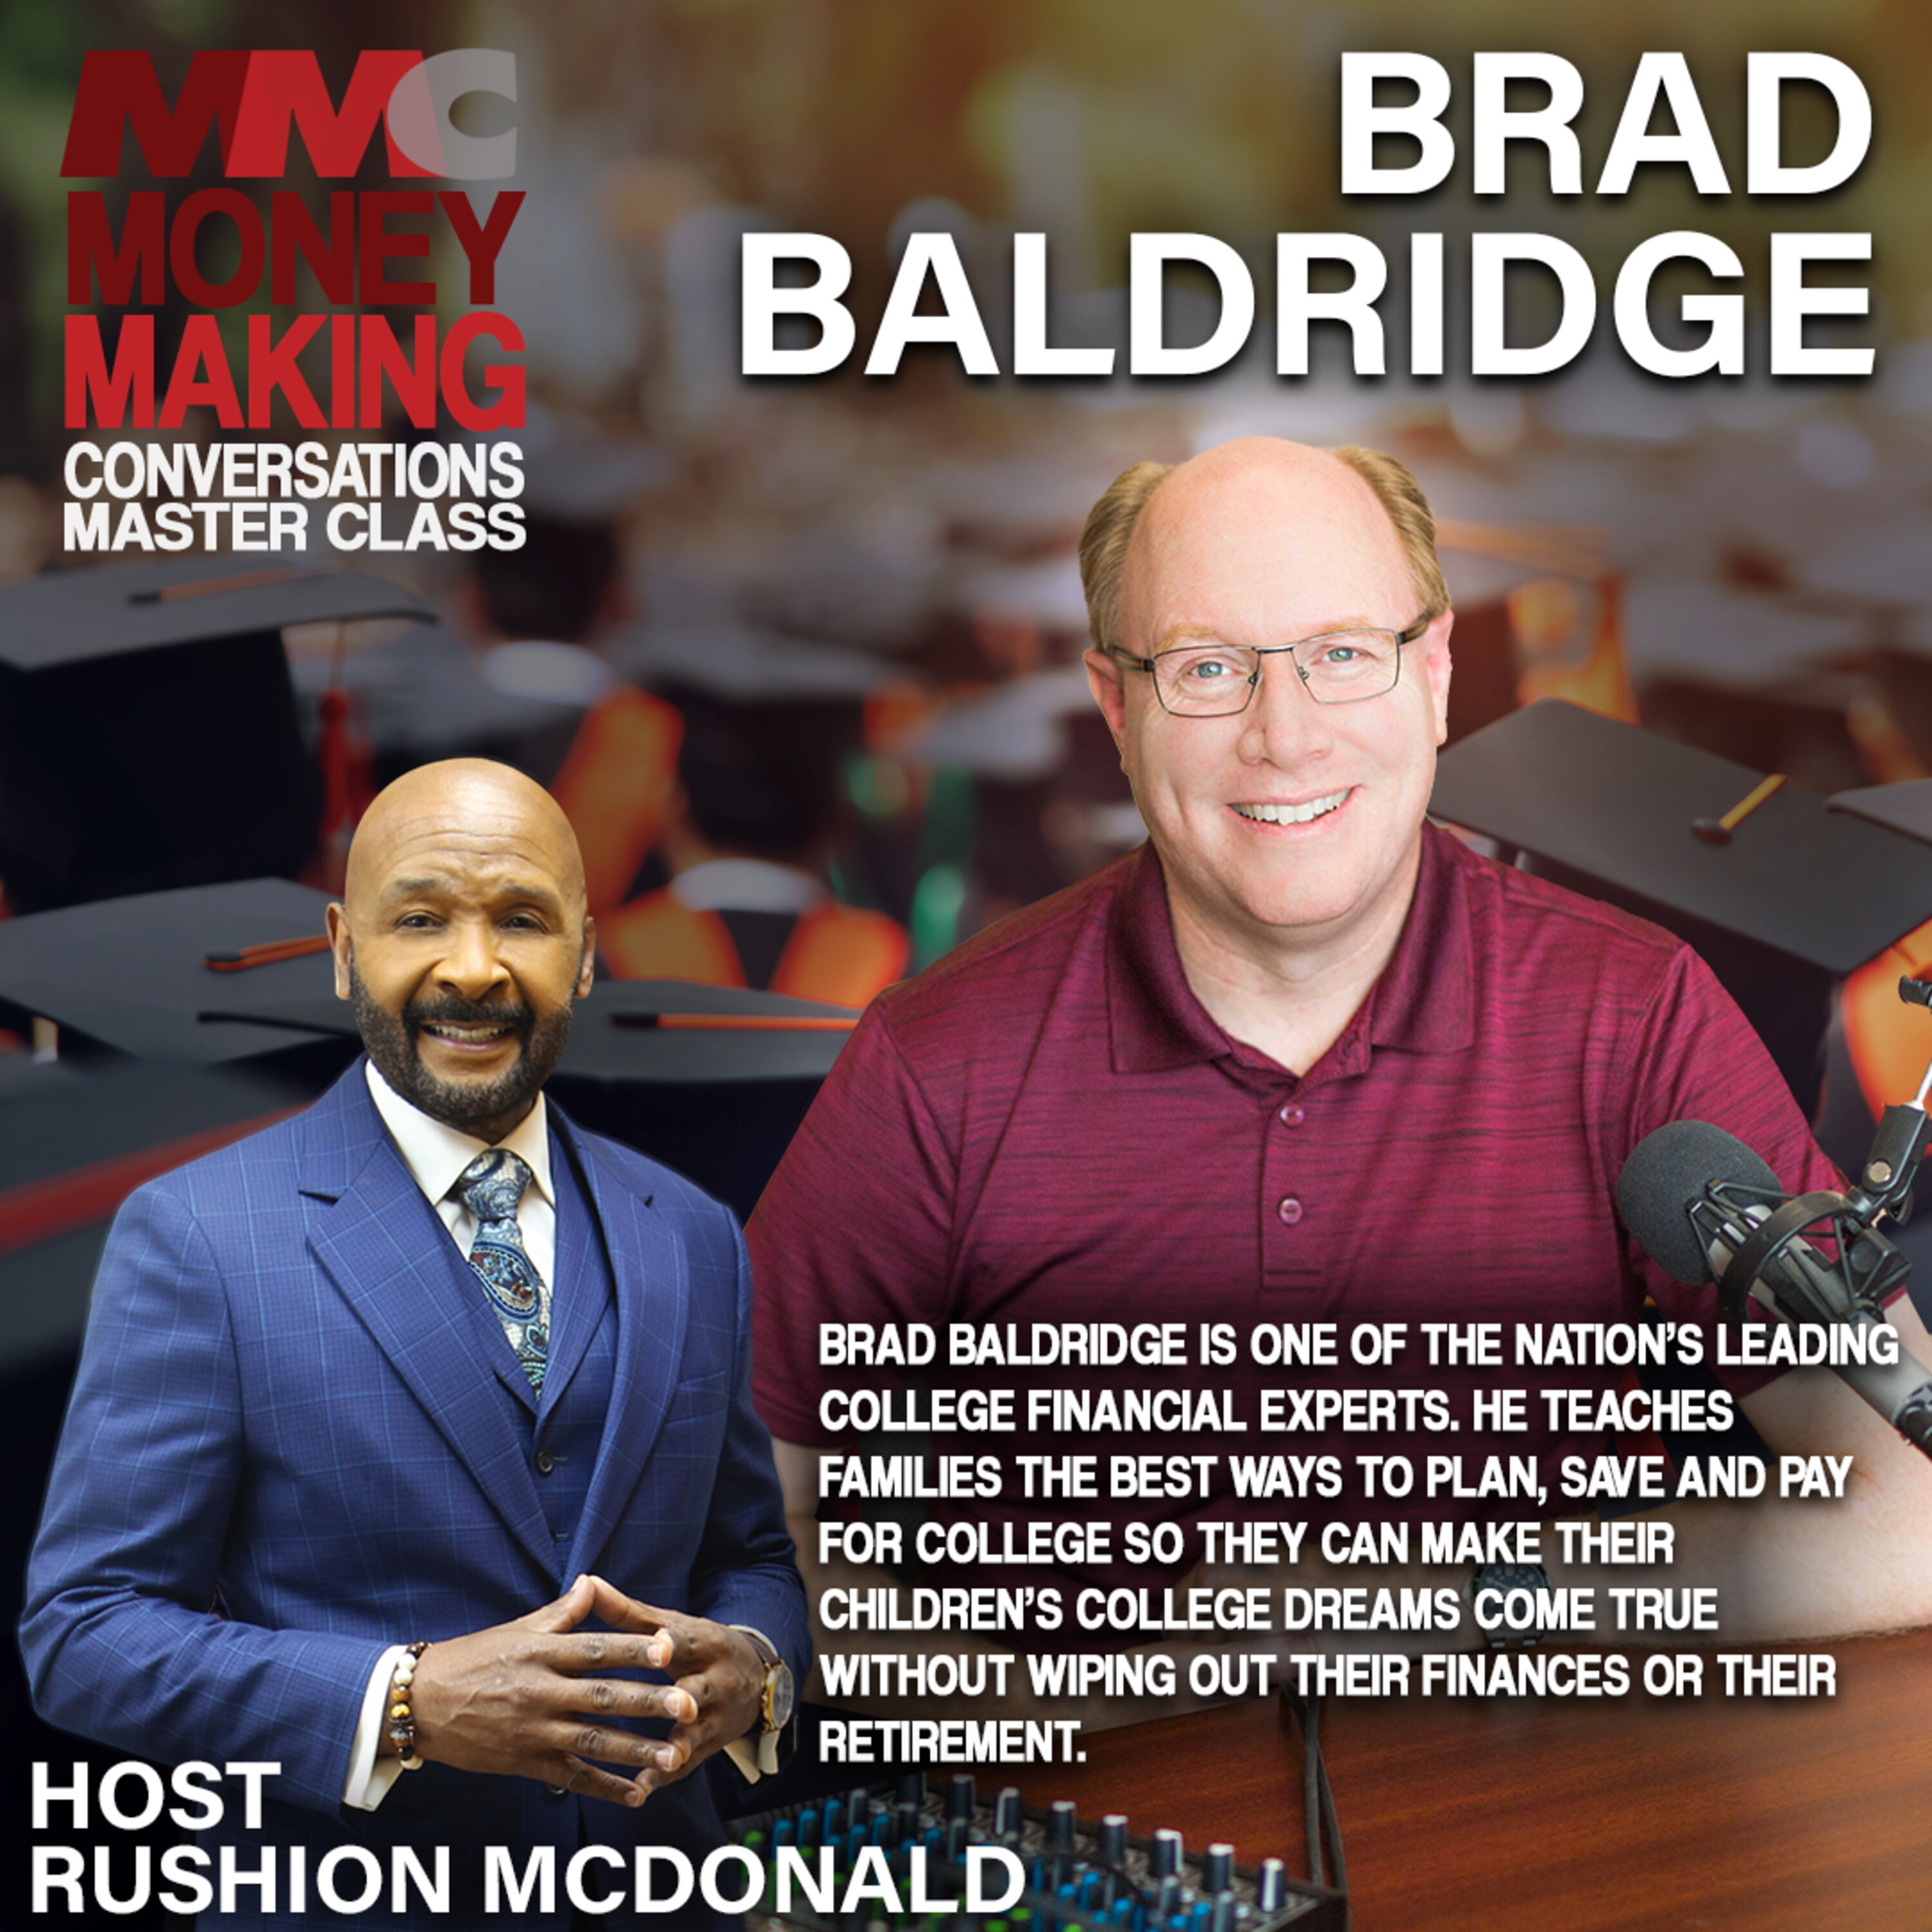 Don’t pay for college, helping students get college scholarship and financial aid by Brad Baldridge.